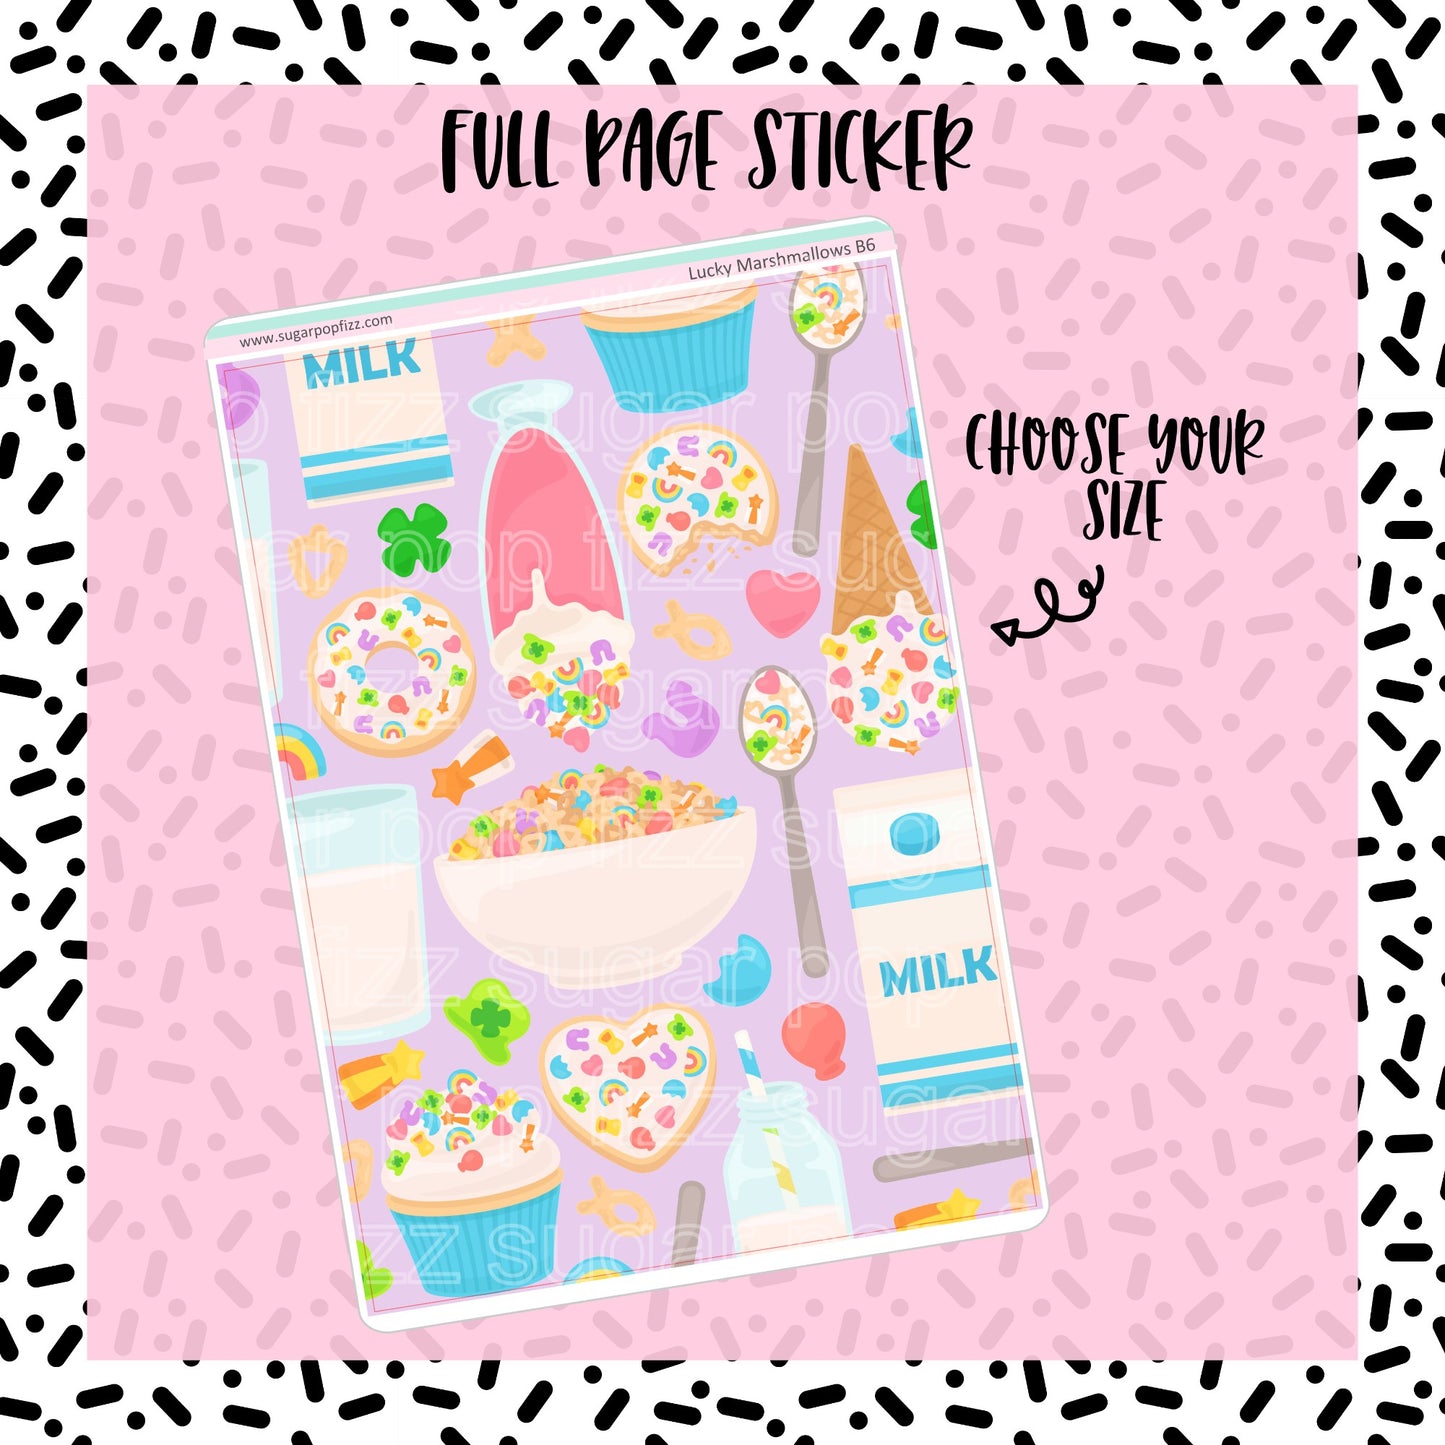 Lucky Marshmallows - Full Page Sticker